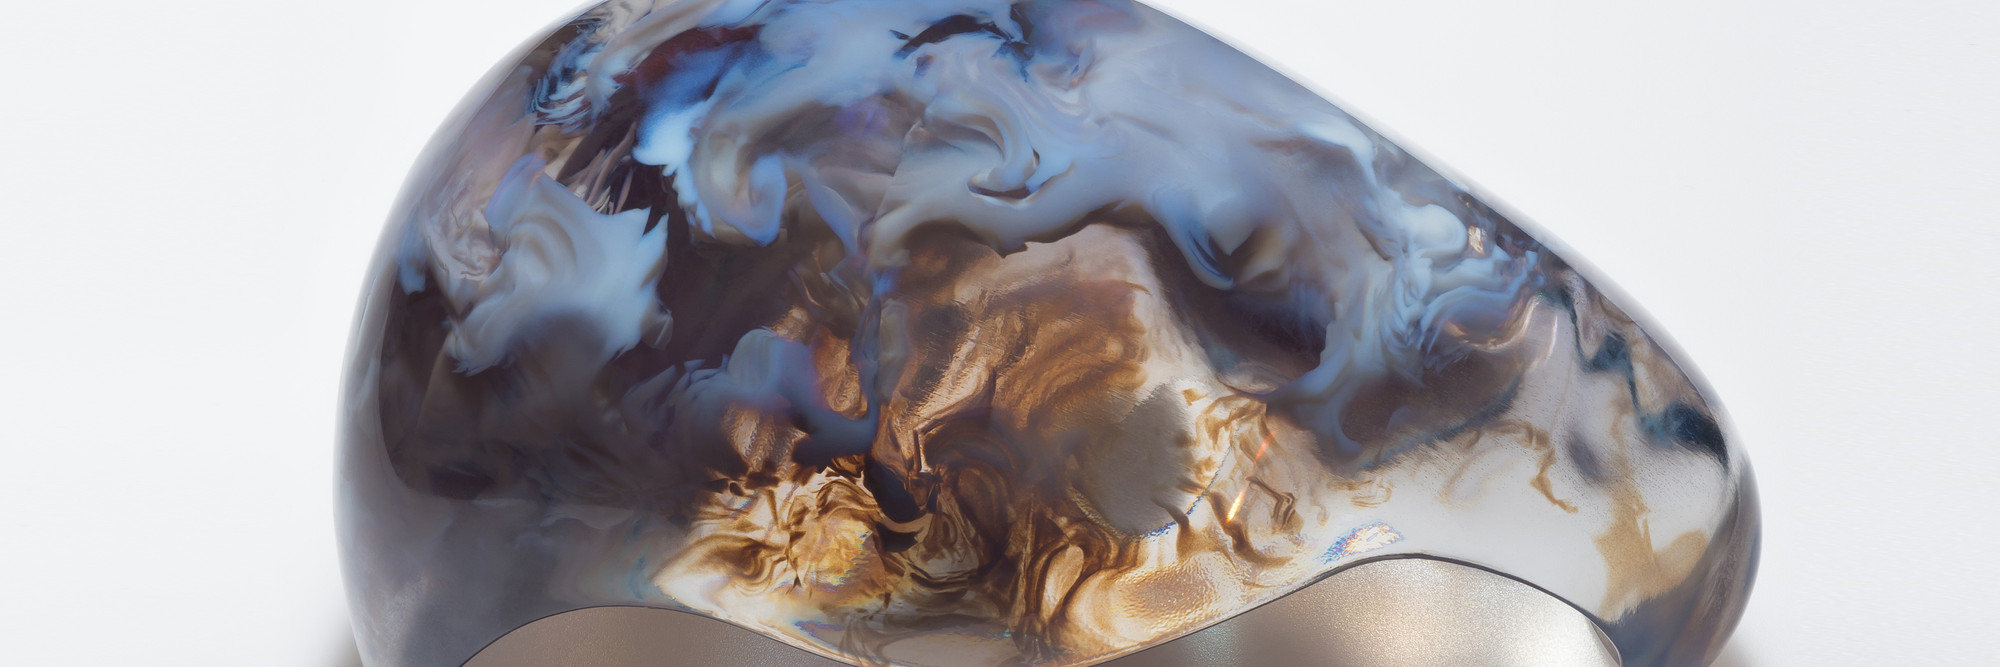 Neri Oxman and the Mediated Matter Group. Lazarus. 2016. Produced by, and in collaboration with, Stratasys, Ltd. Courtesy the Mediated Matter Group